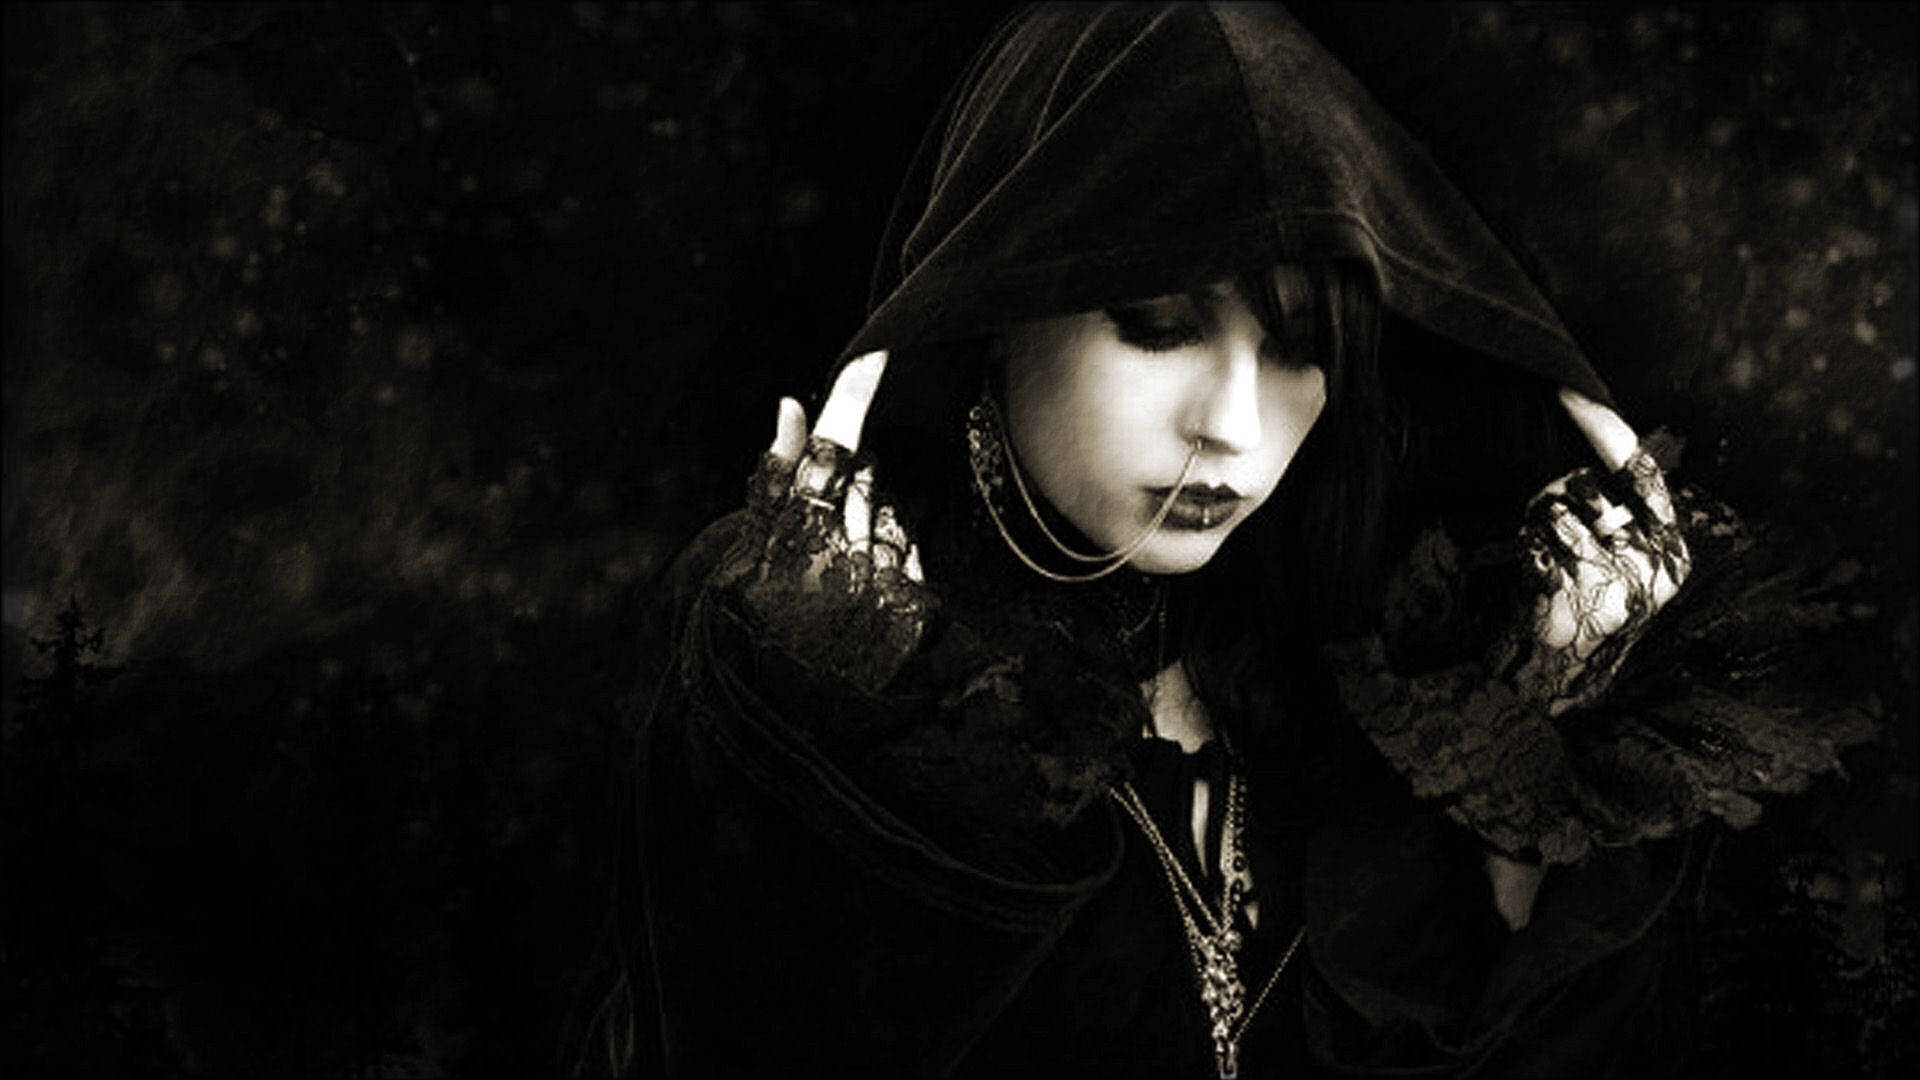 Free Gothic Wallpaper Downloads, [200+] Gothic Wallpapers for FREE |  